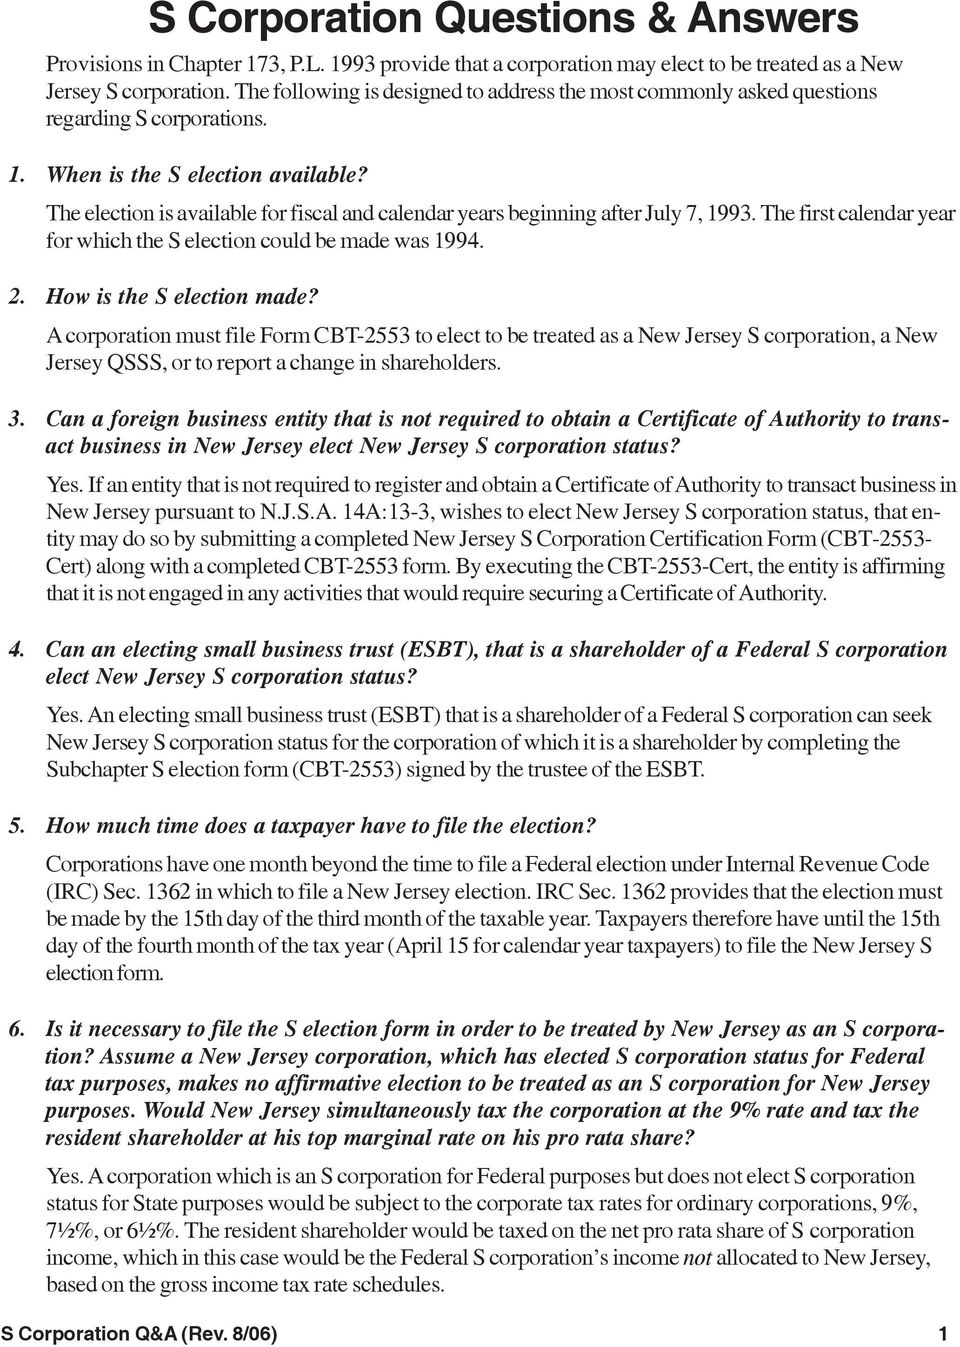 S Corporation Questions &amp; Answers - Pdf Free Download